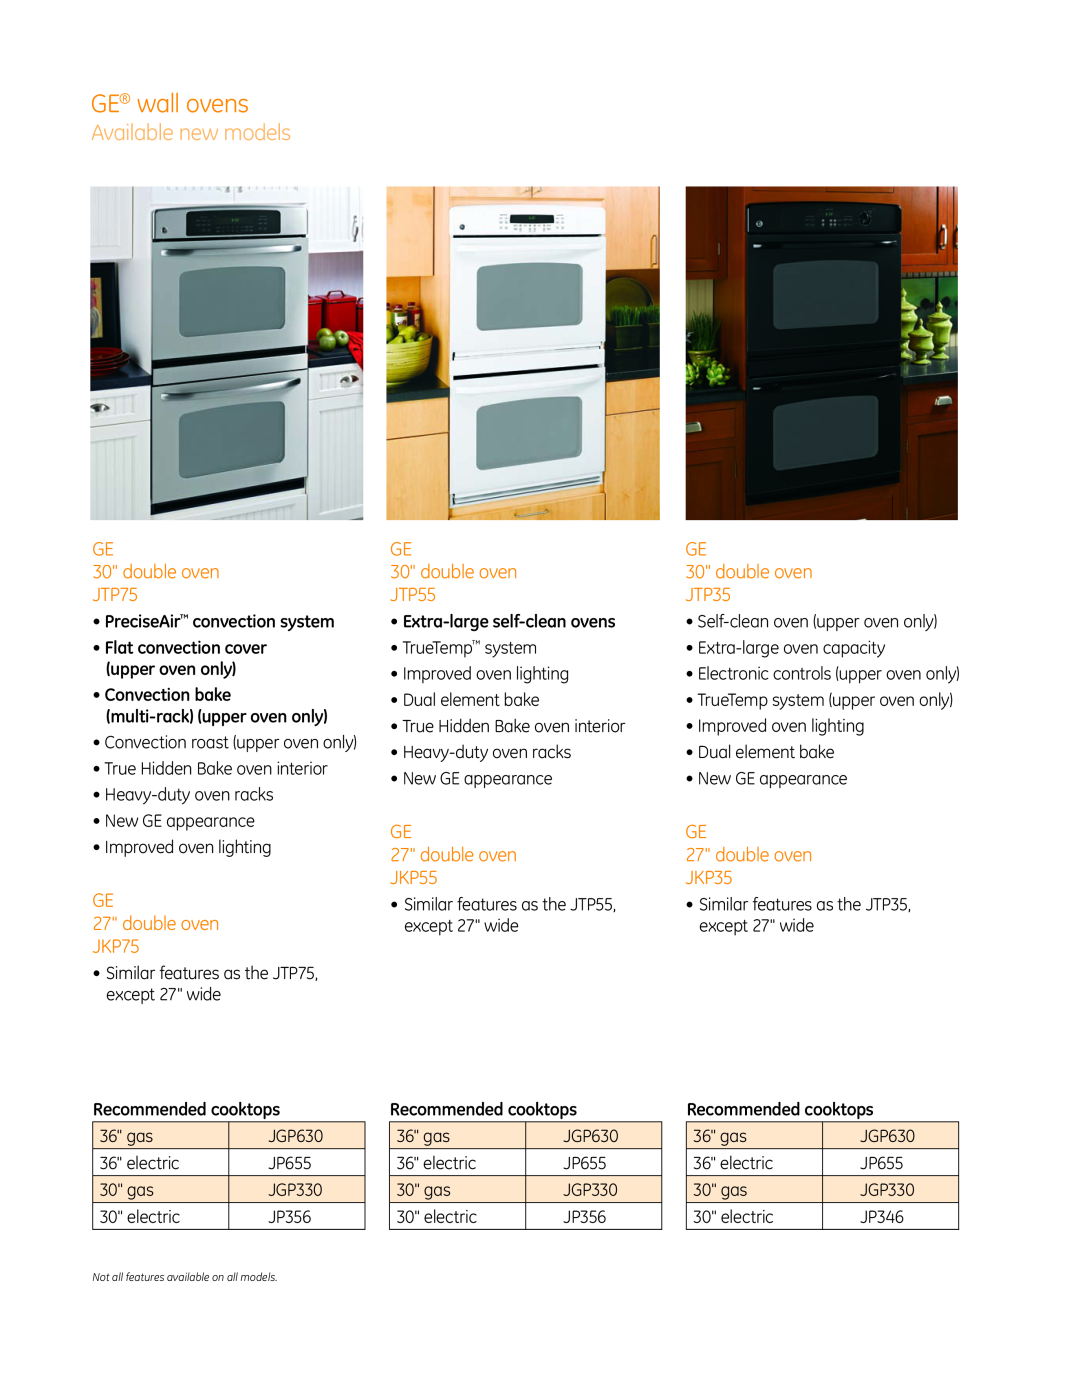 GE PT960 GE wall ovens, GE 30 double oven JTP75, GE 27 double oven JKP75, JTP55, JTP35, JKP55, JKP35, Available new models 